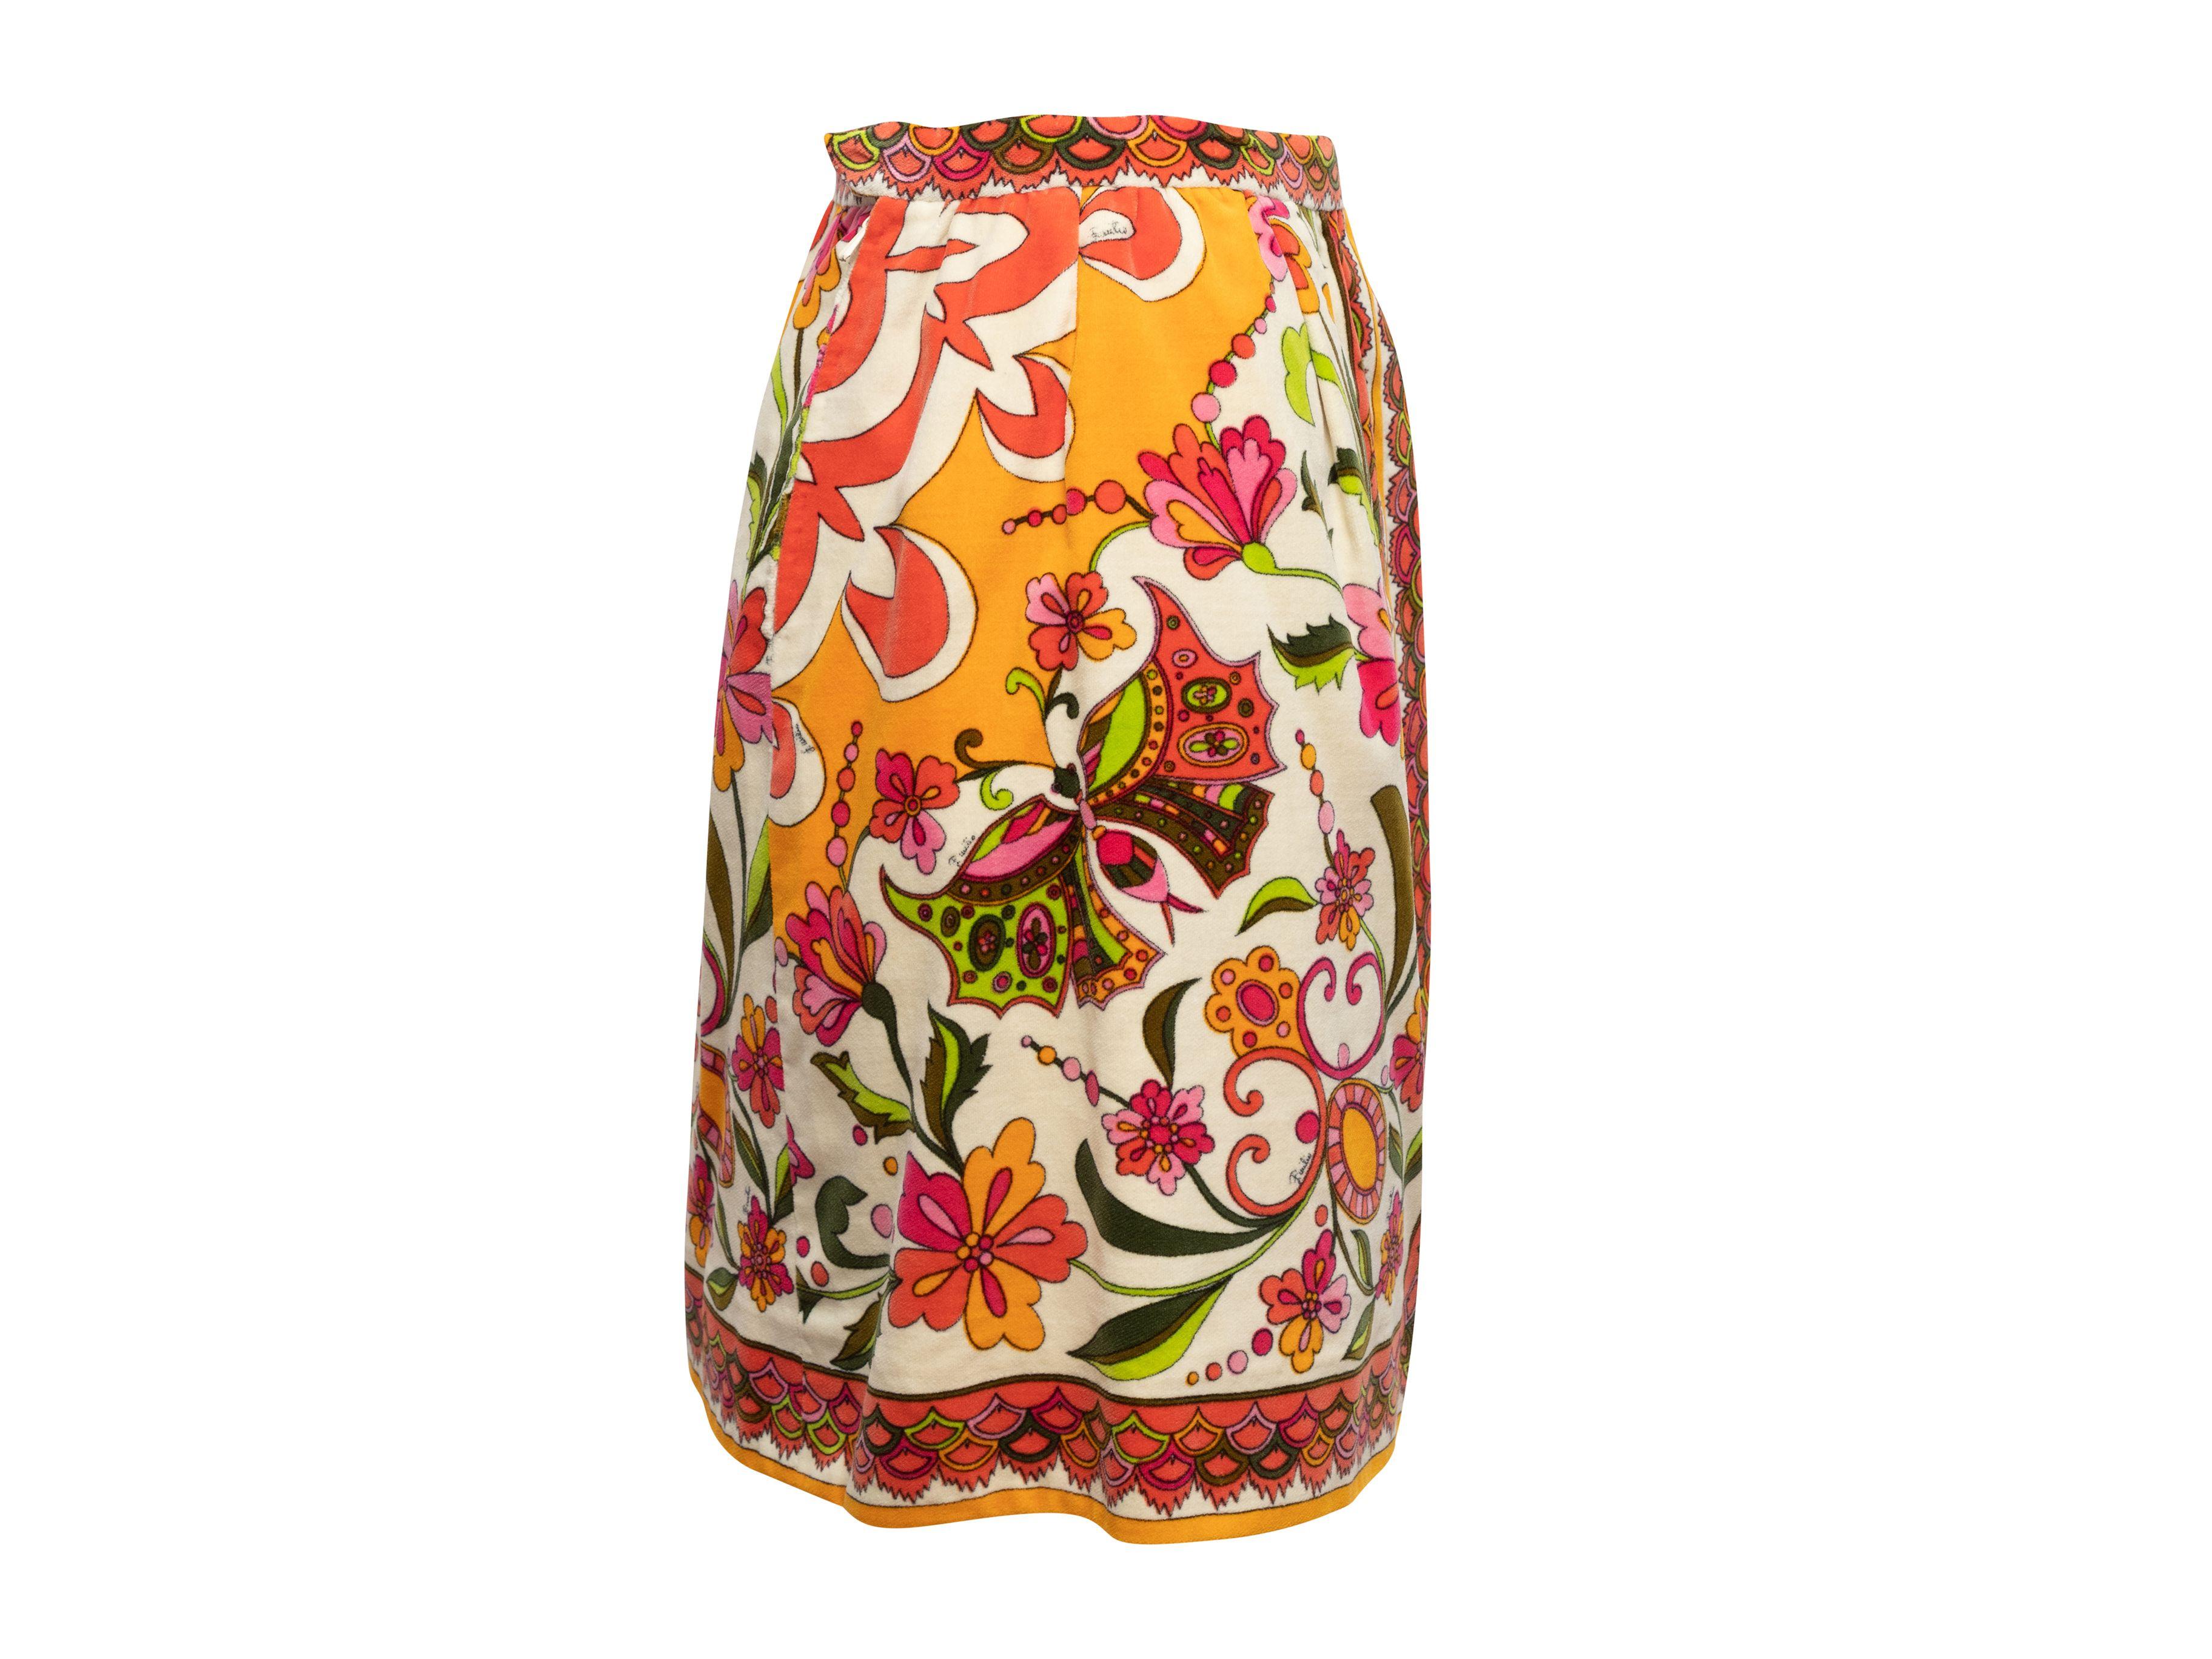 Emilio Pucci Orange & Multicolor 60s Floral Print Velvet Skirt In Good Condition For Sale In New York, NY